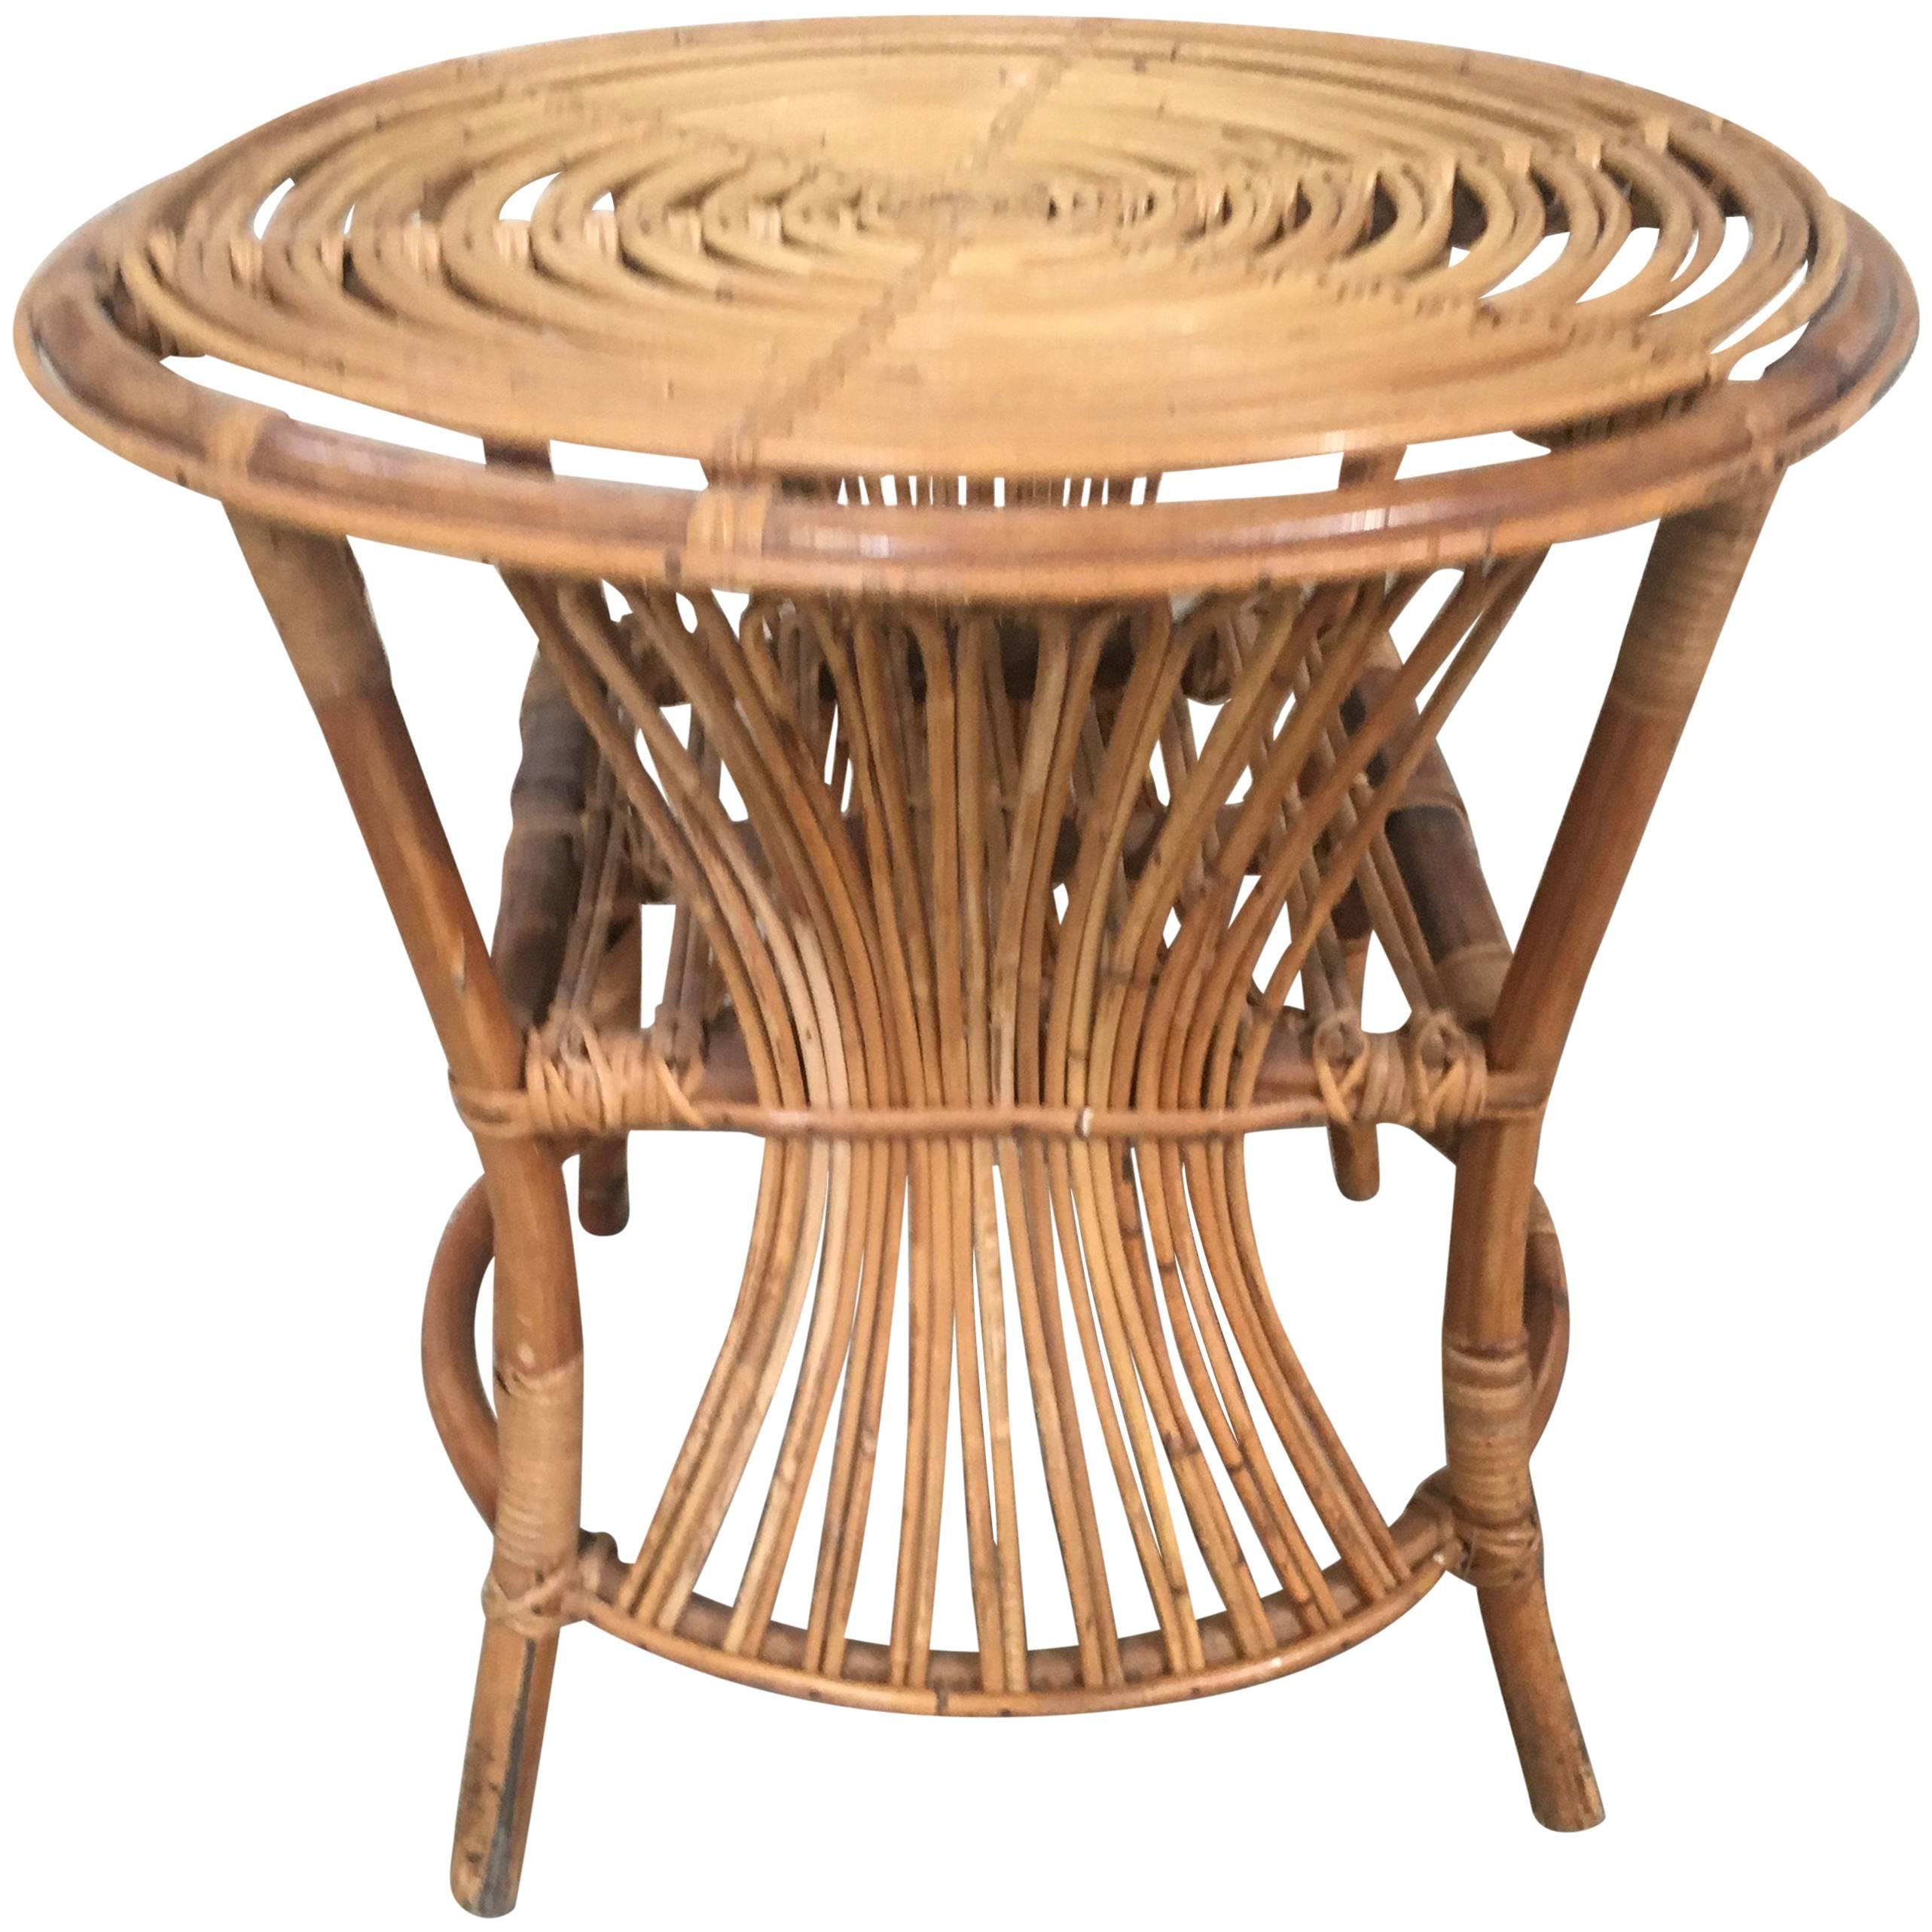 Italian Bamboo and Rattan Side Table from 1950s